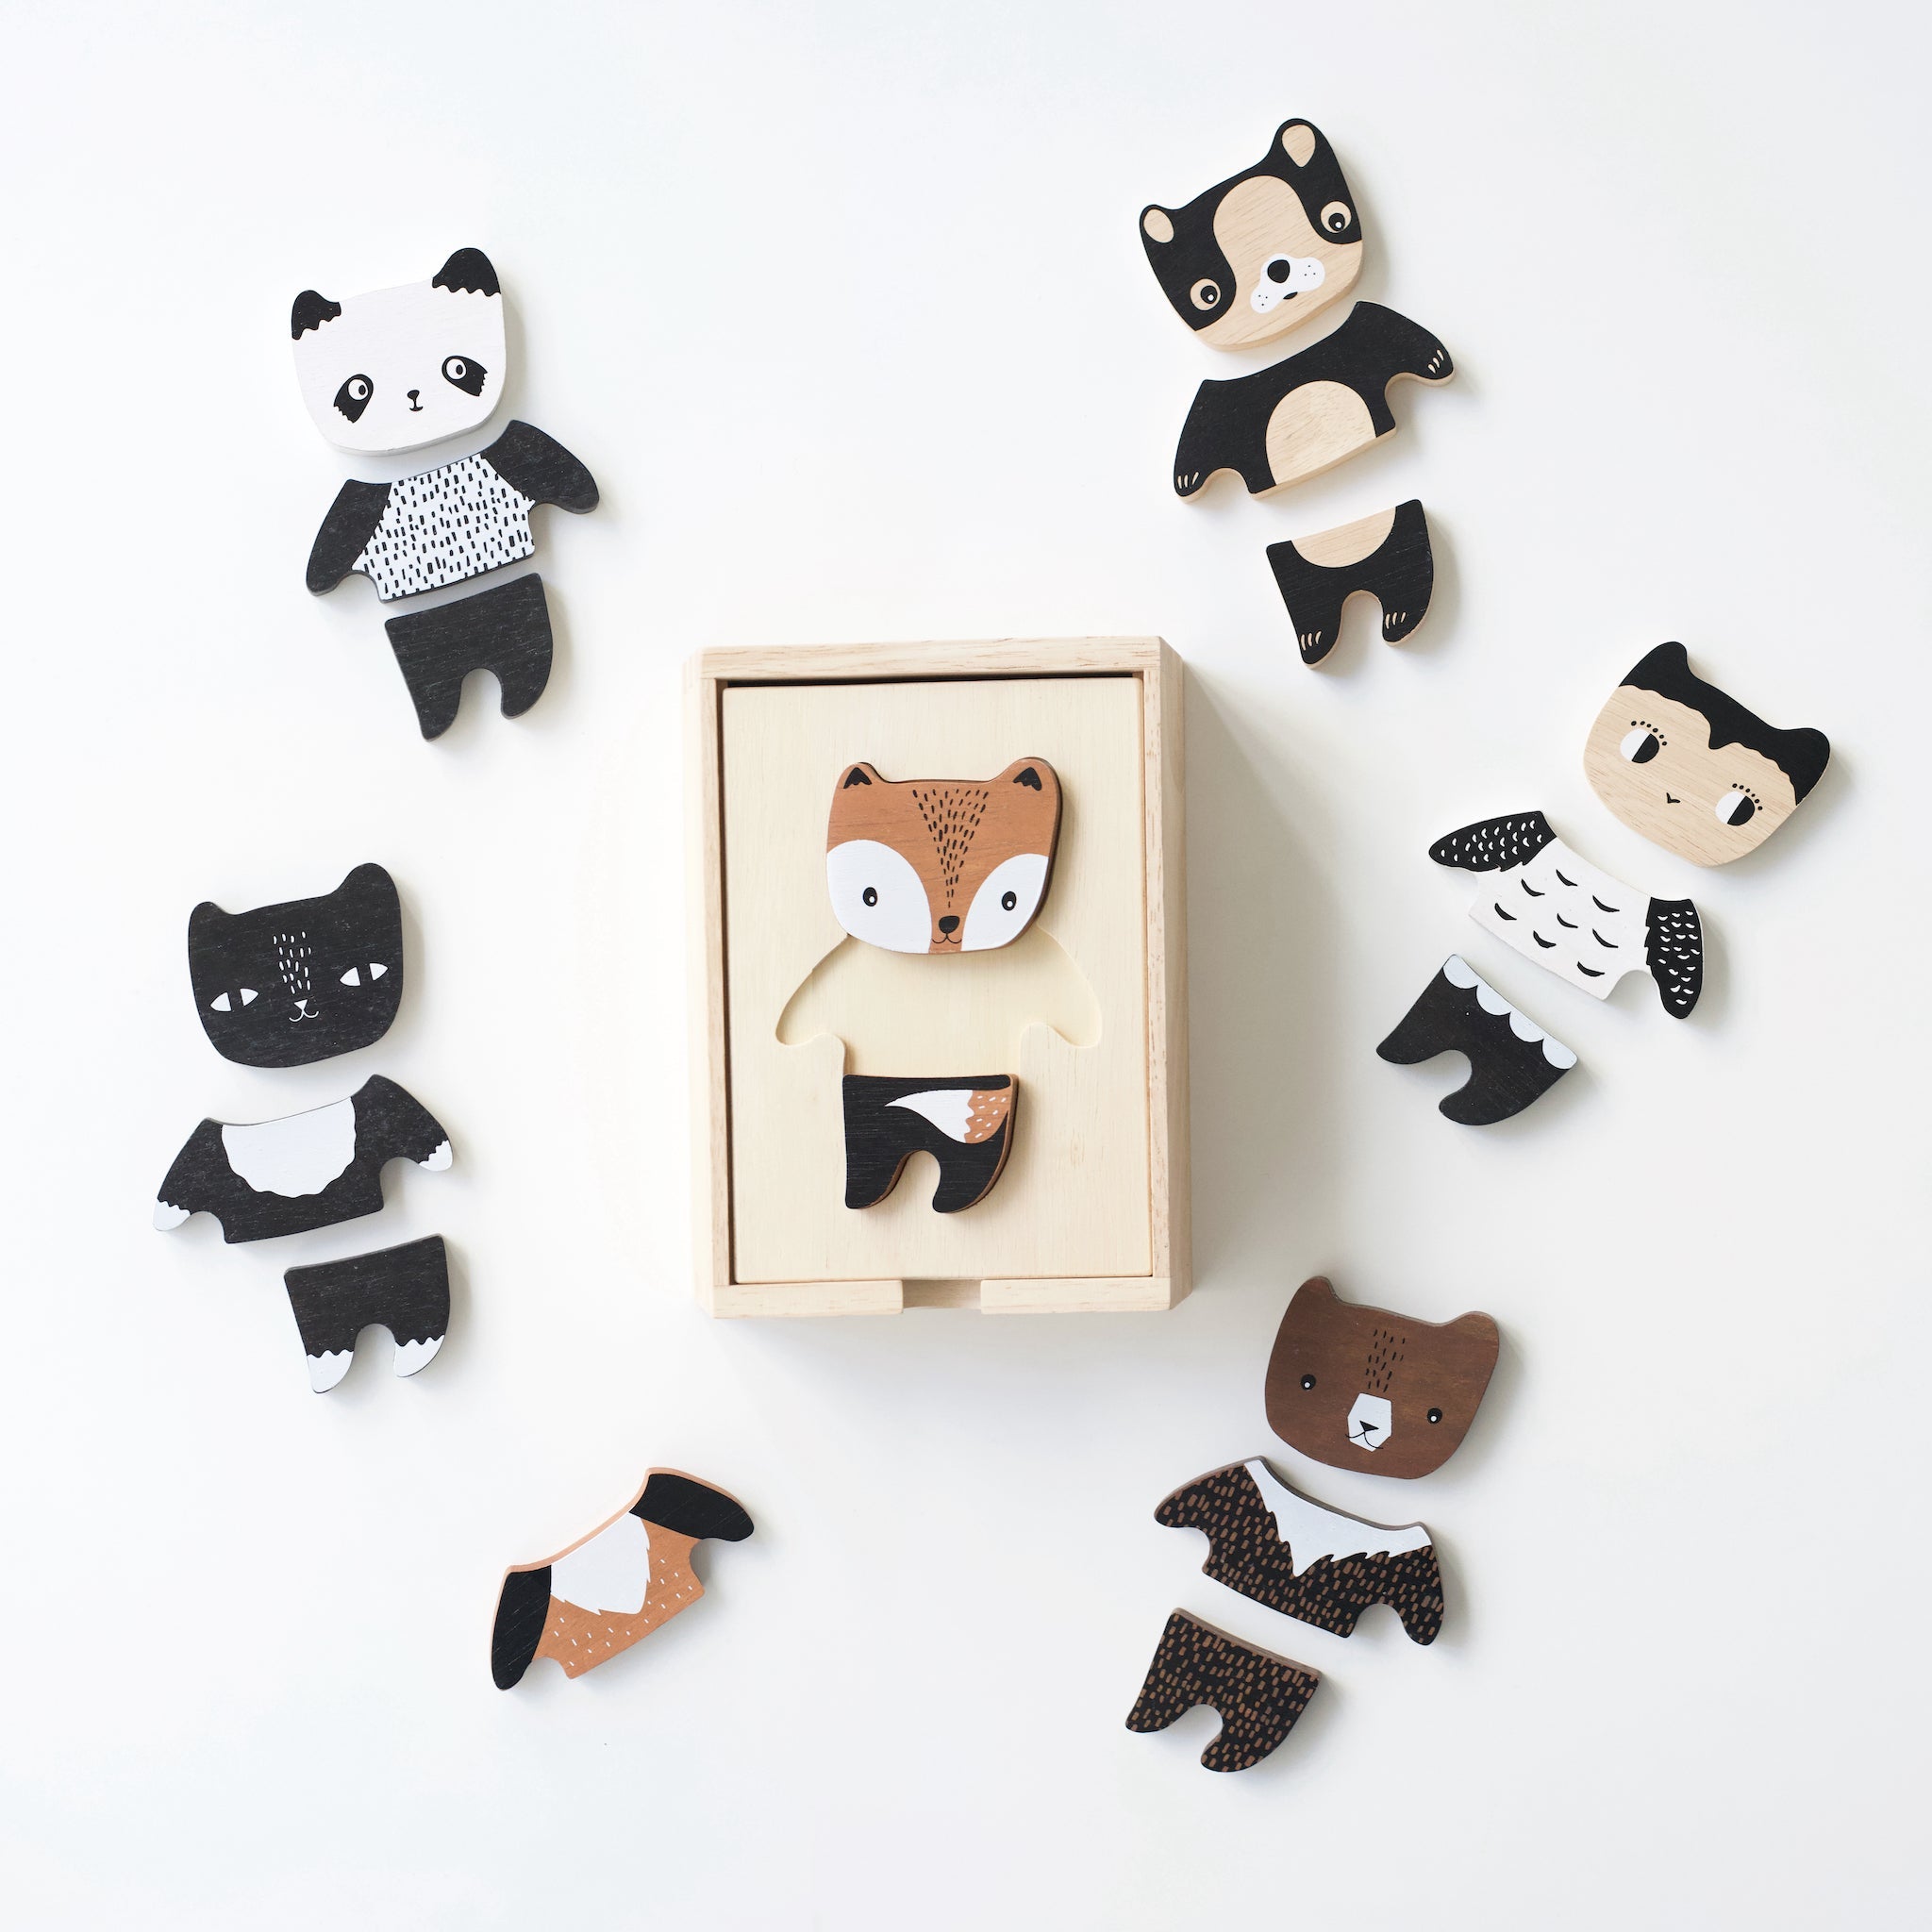 mix-and-match-animal-tiles-wood-childrens-toy.jpg